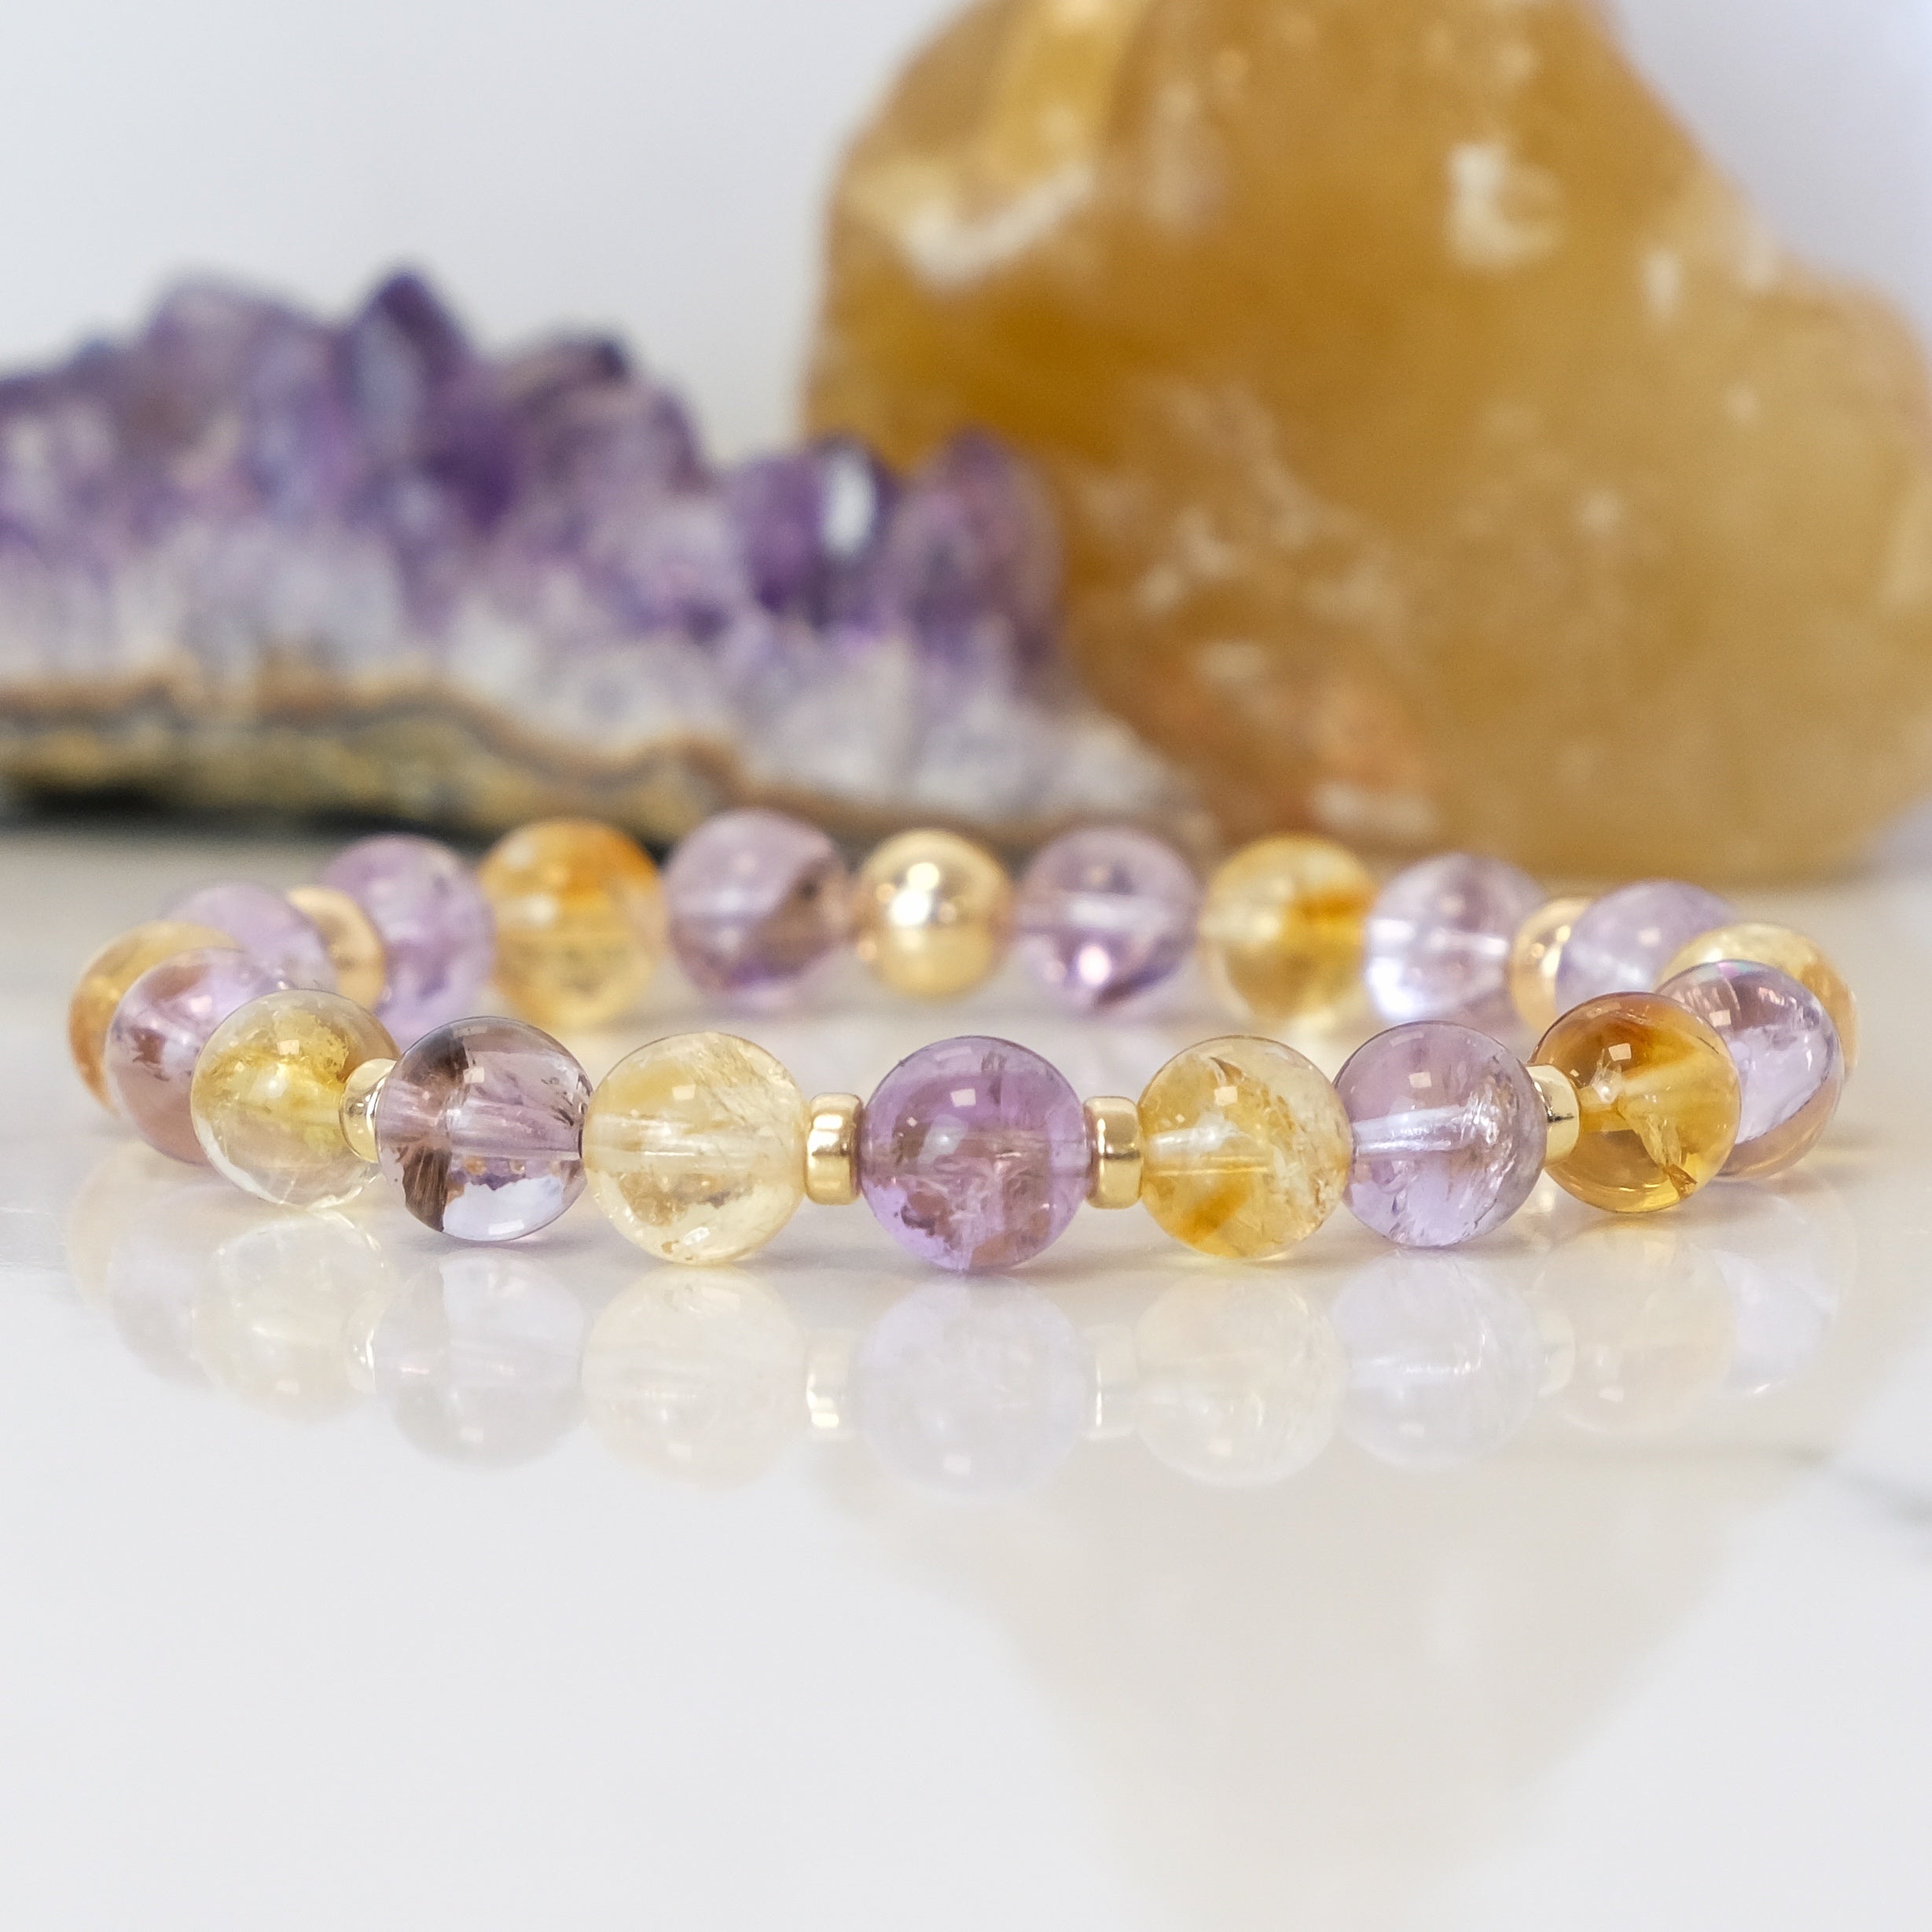 Amethyst and Citrine gemstone bracelet with 14kt gold filled accessories